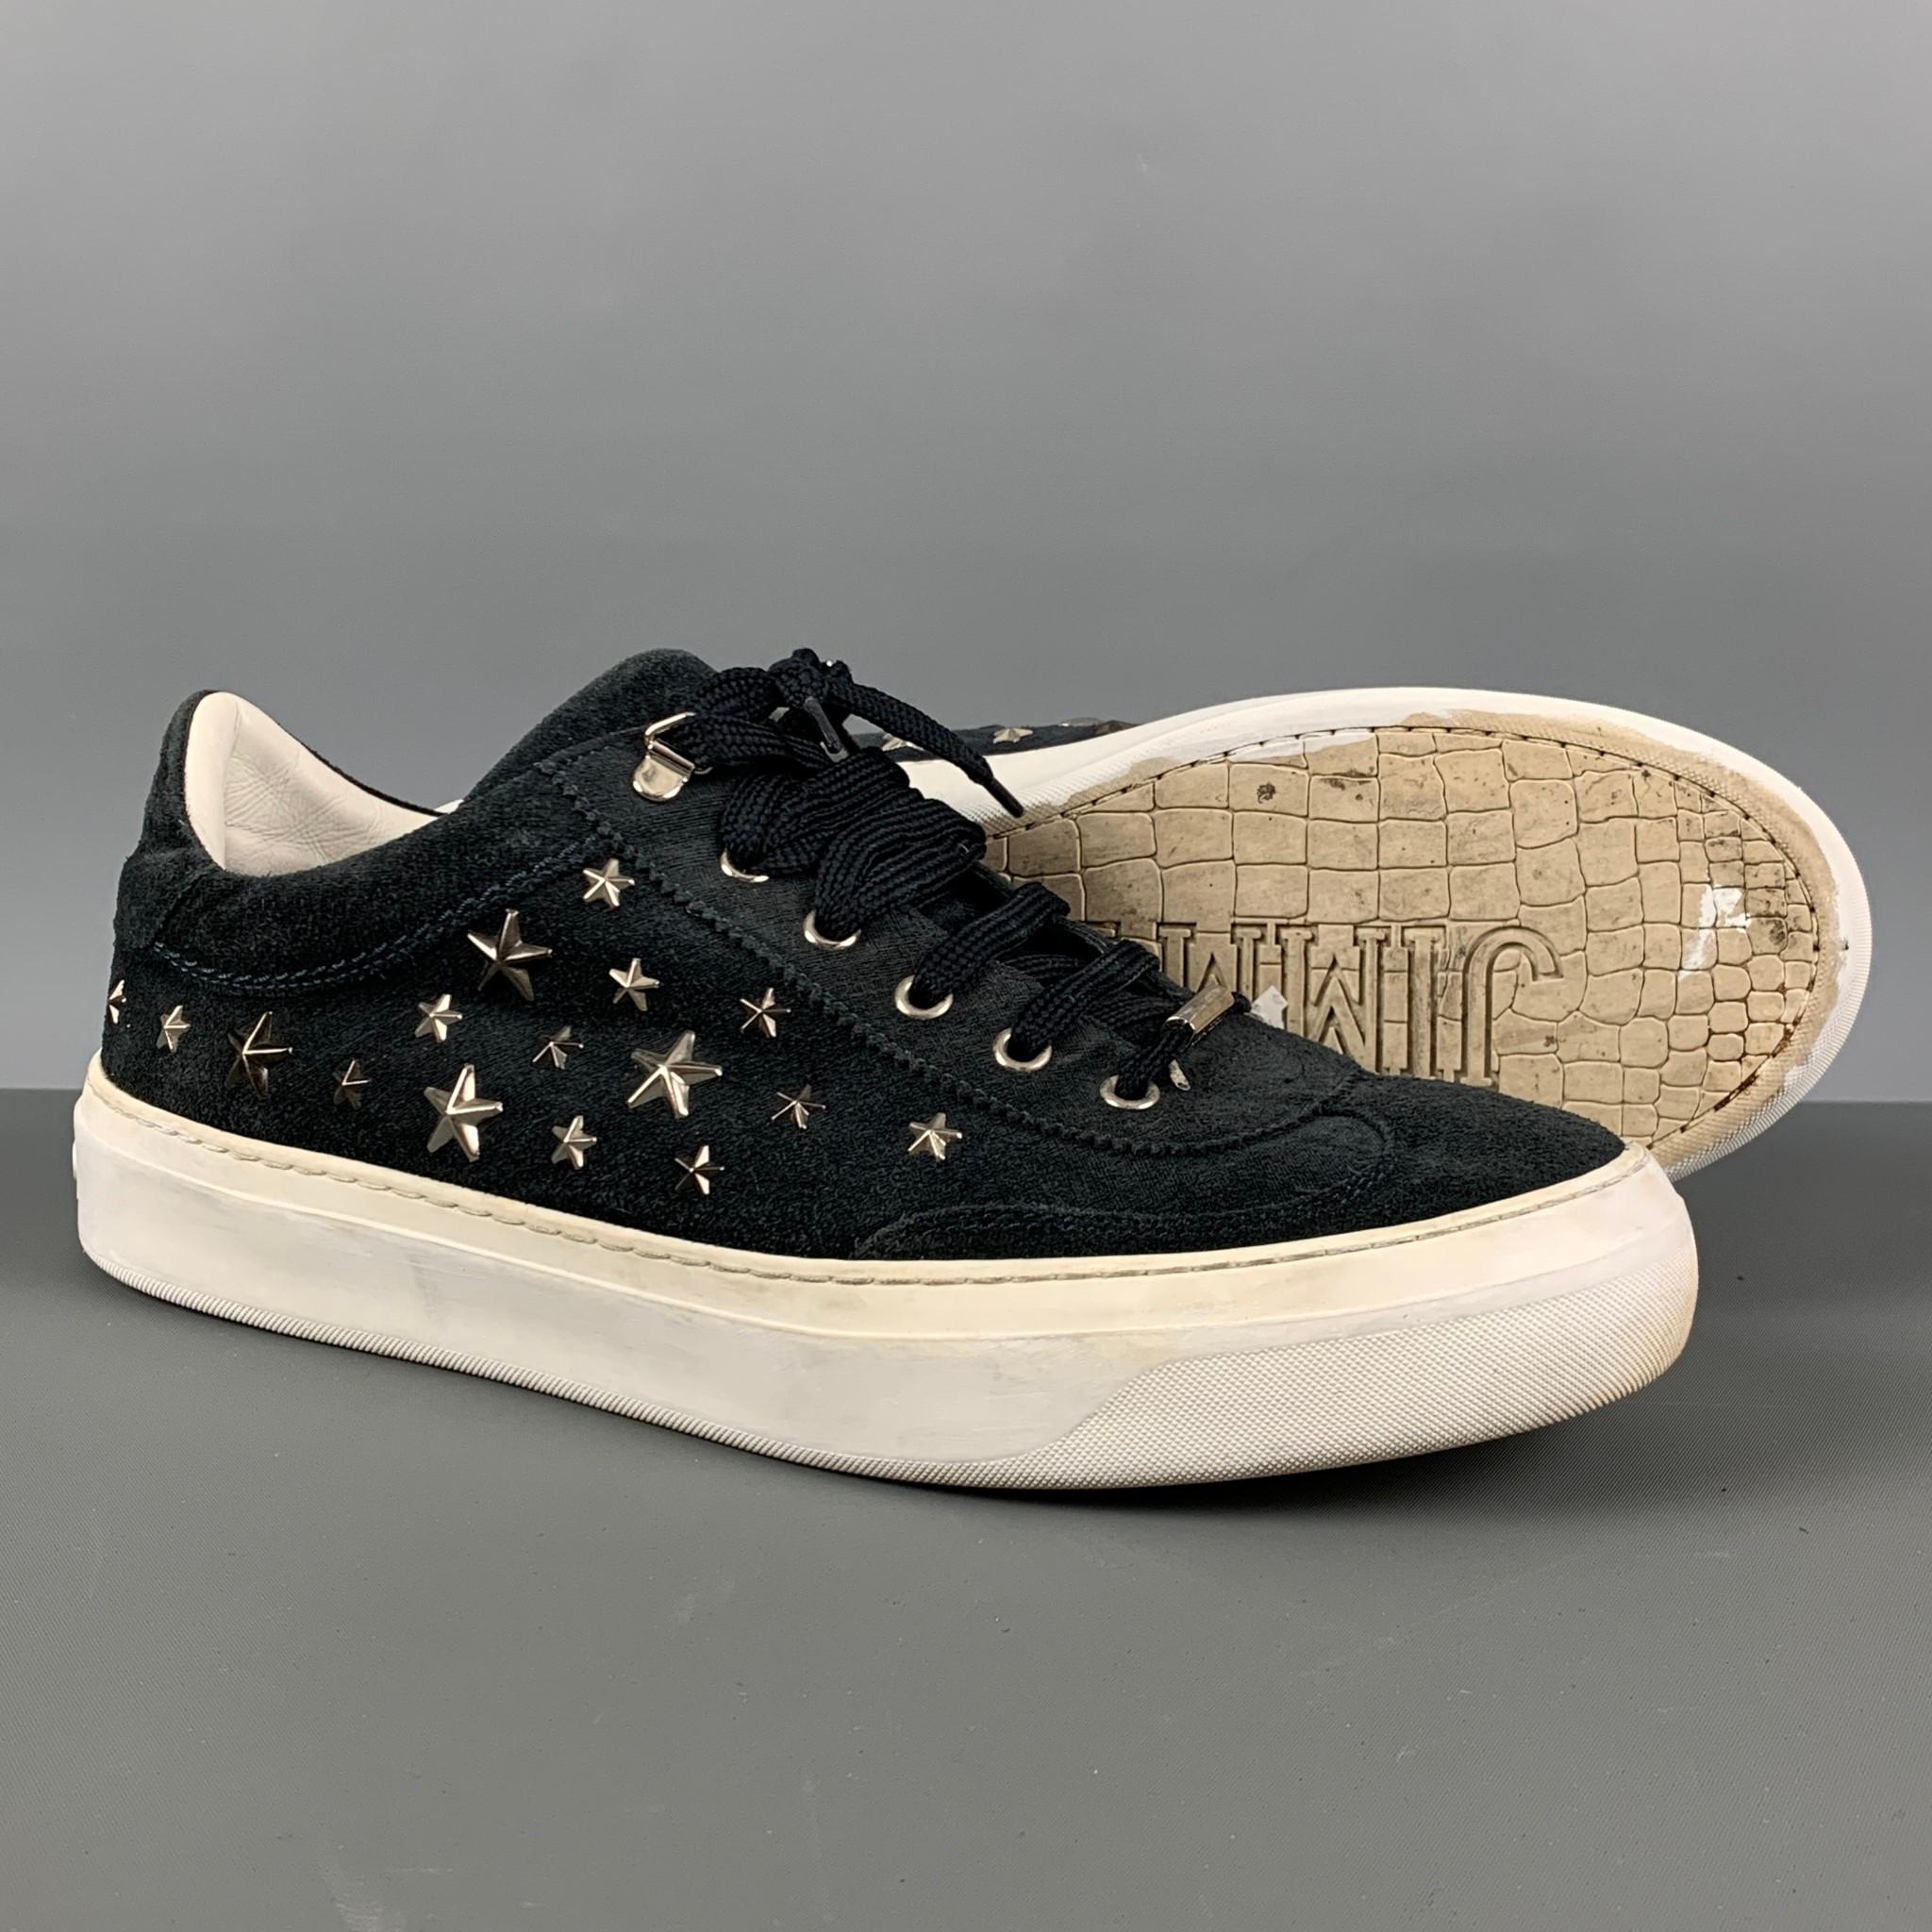 Men's JIMMY CHOO Size 10 Navy Silver Studded Suede Sneakers